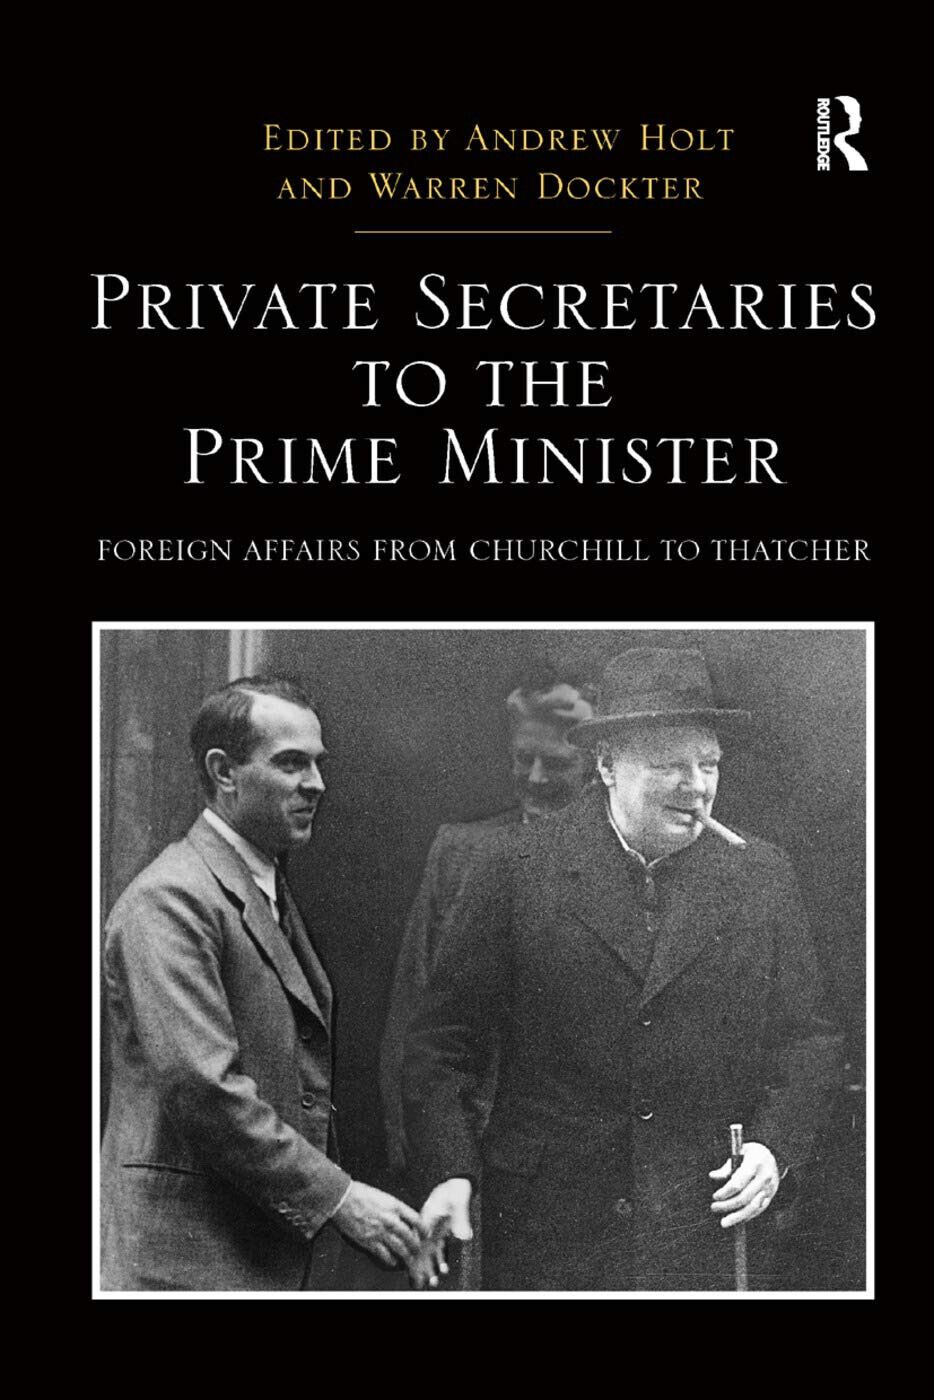 Private Secretaries to the Prime Minister - Andrew Holt - Taylor & Francis, 2019